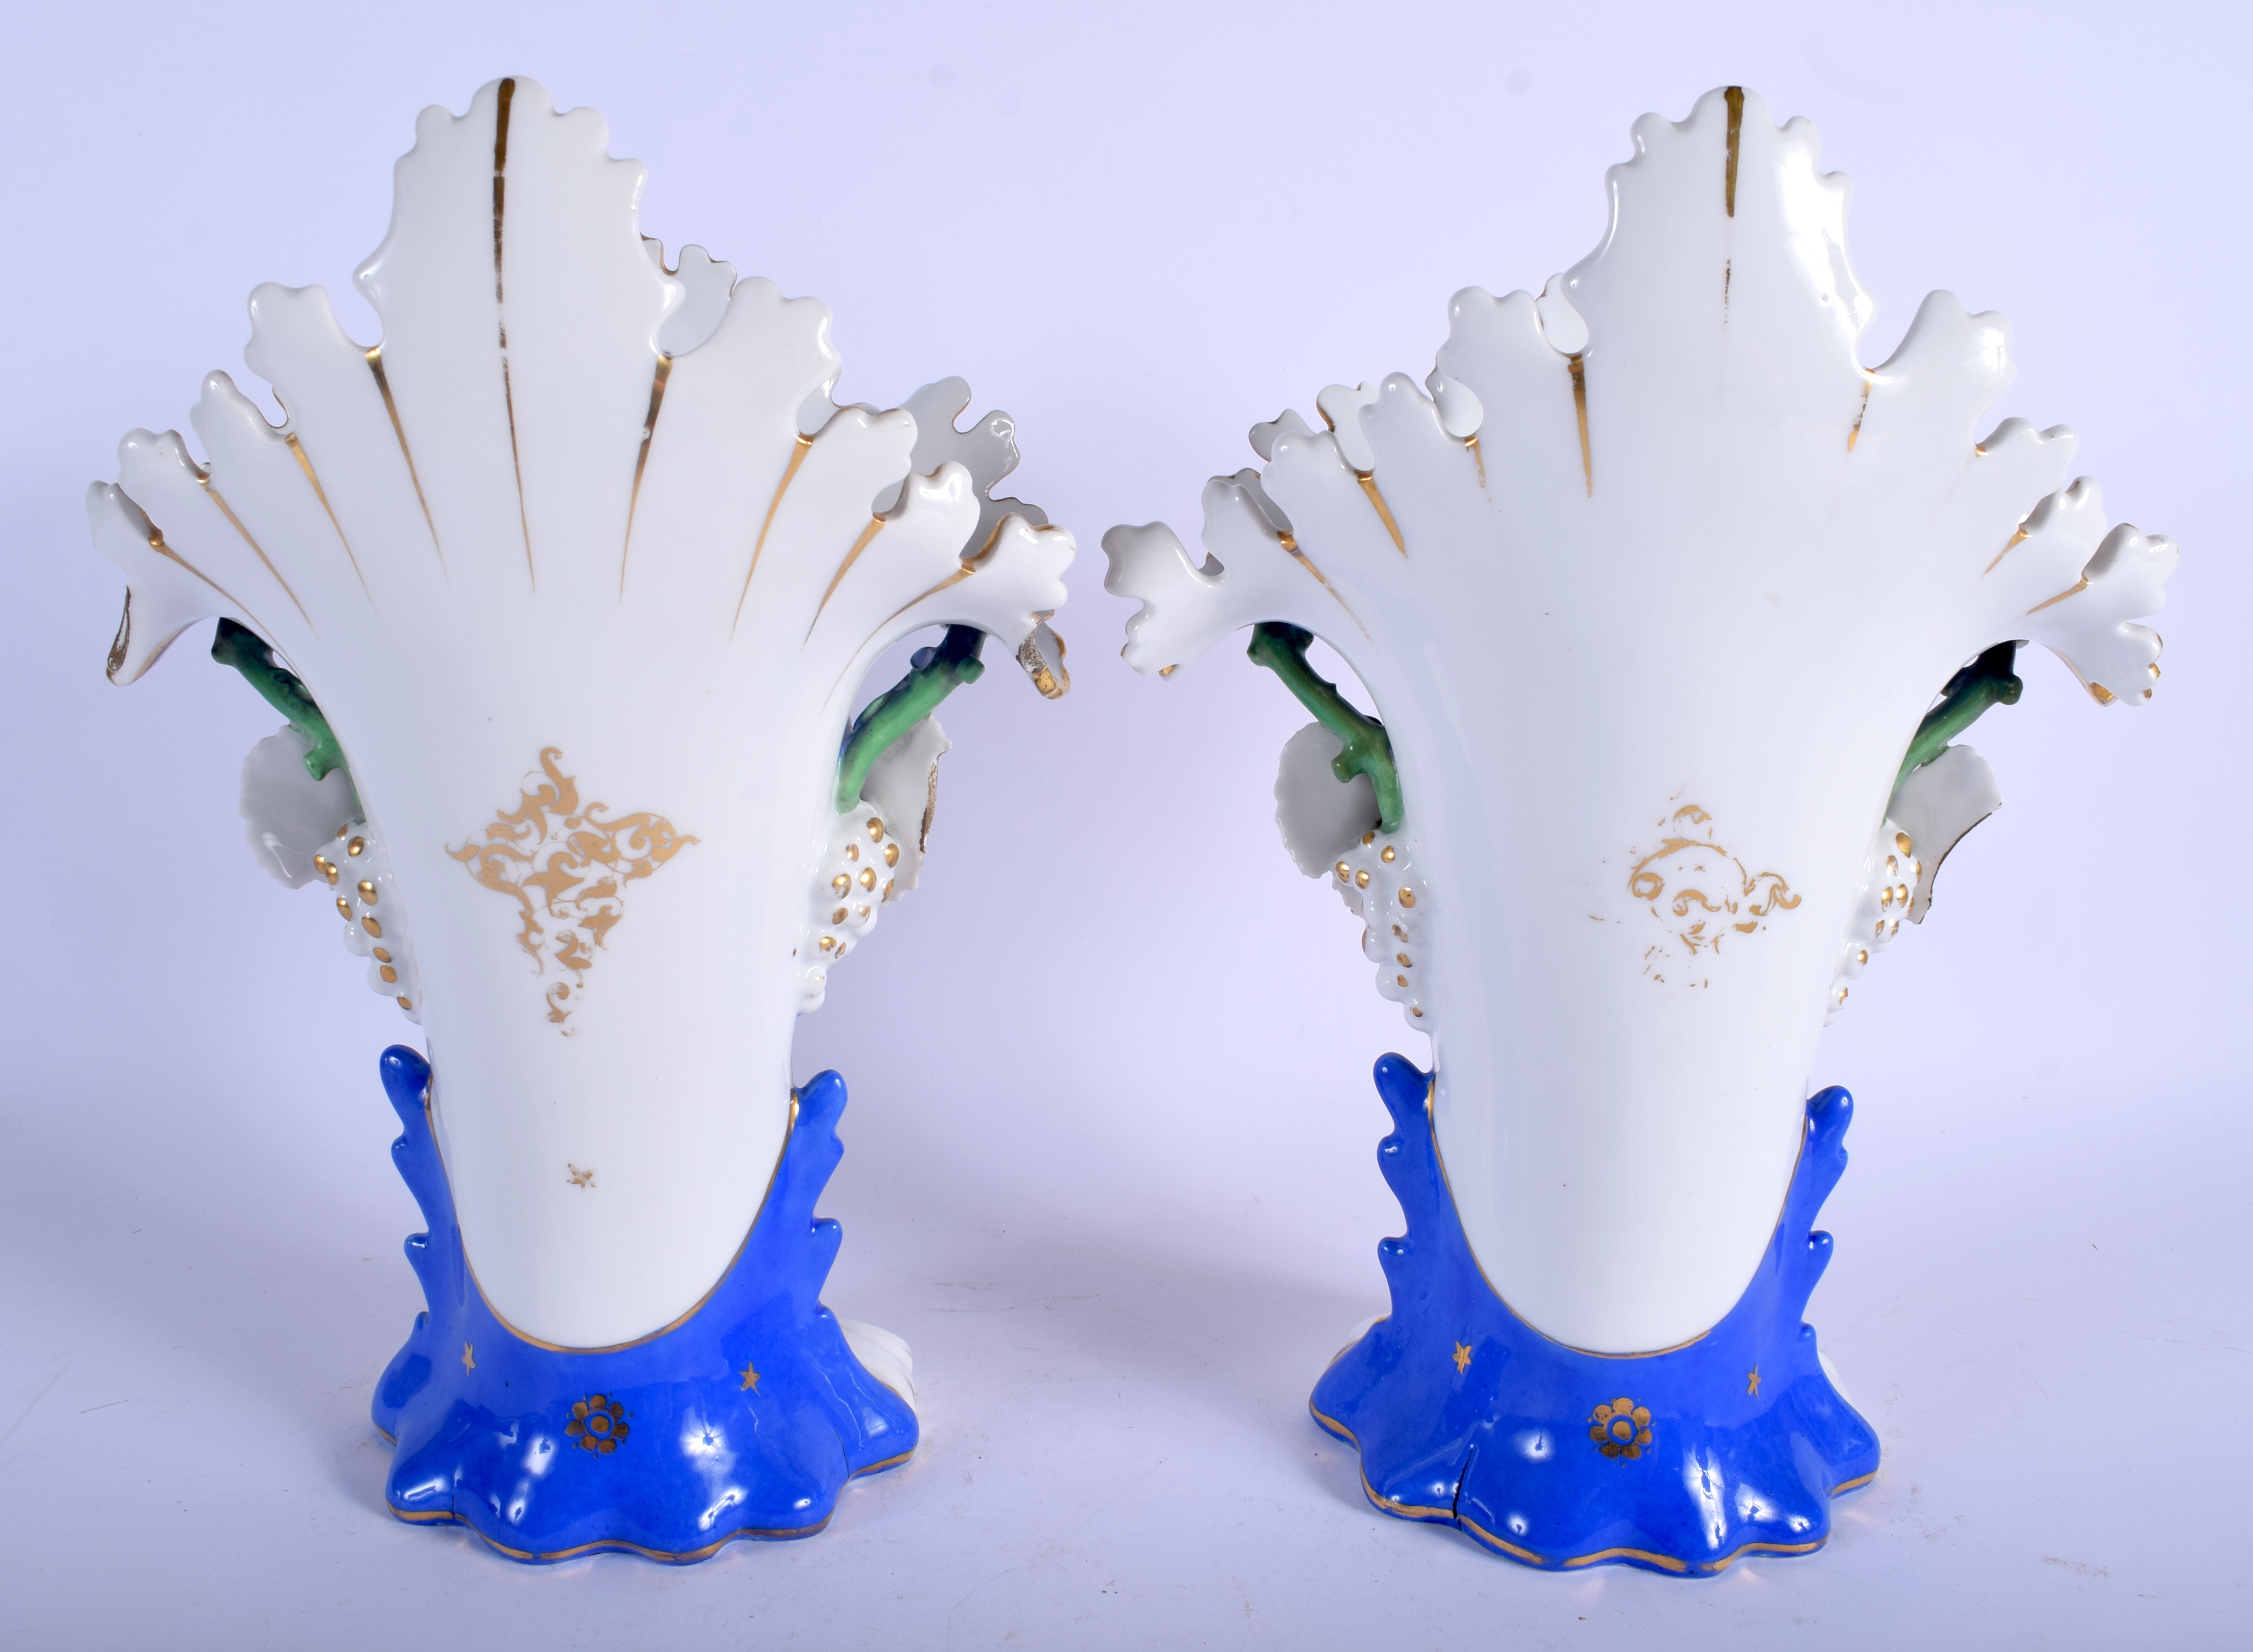 A LARGE PAIR OF 19TH CENTURY FRENCH PARIS PORCELAIN VASES painted with flowers. 34 cm x 16 cm. - Image 2 of 3